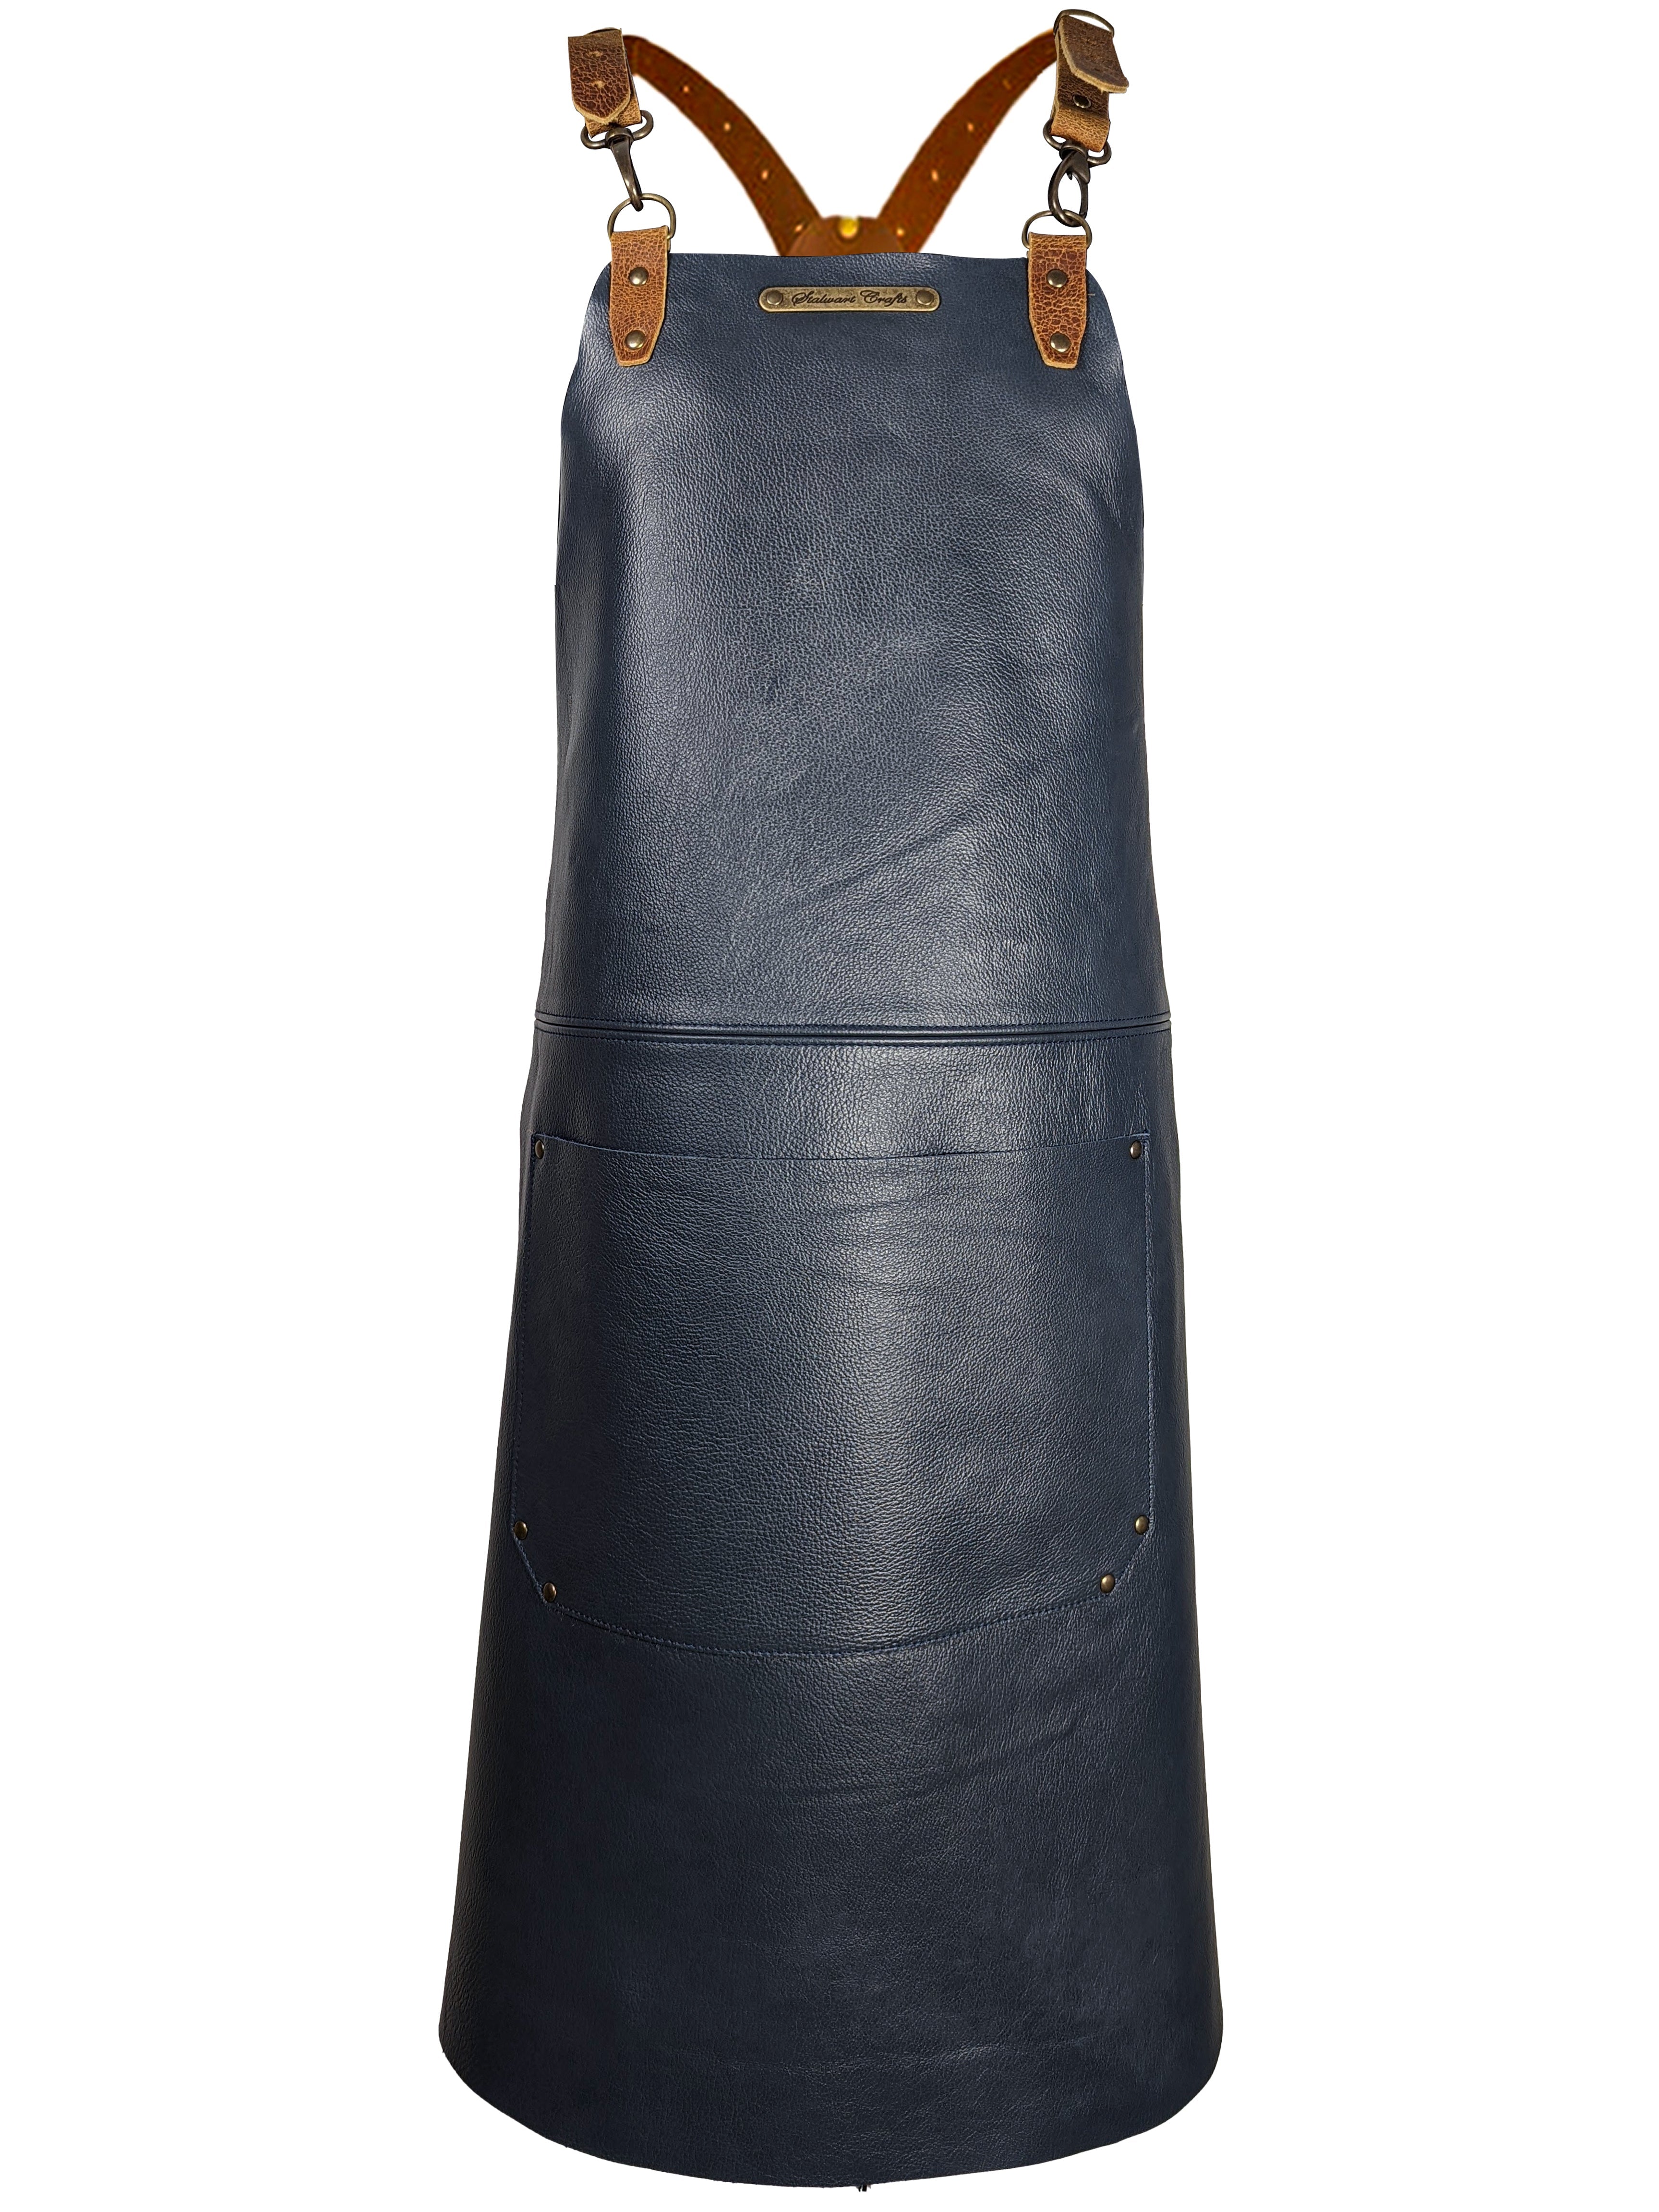 Leather Apron Cross Strap Deluxe Marine by Stalwart -  ChefsCotton